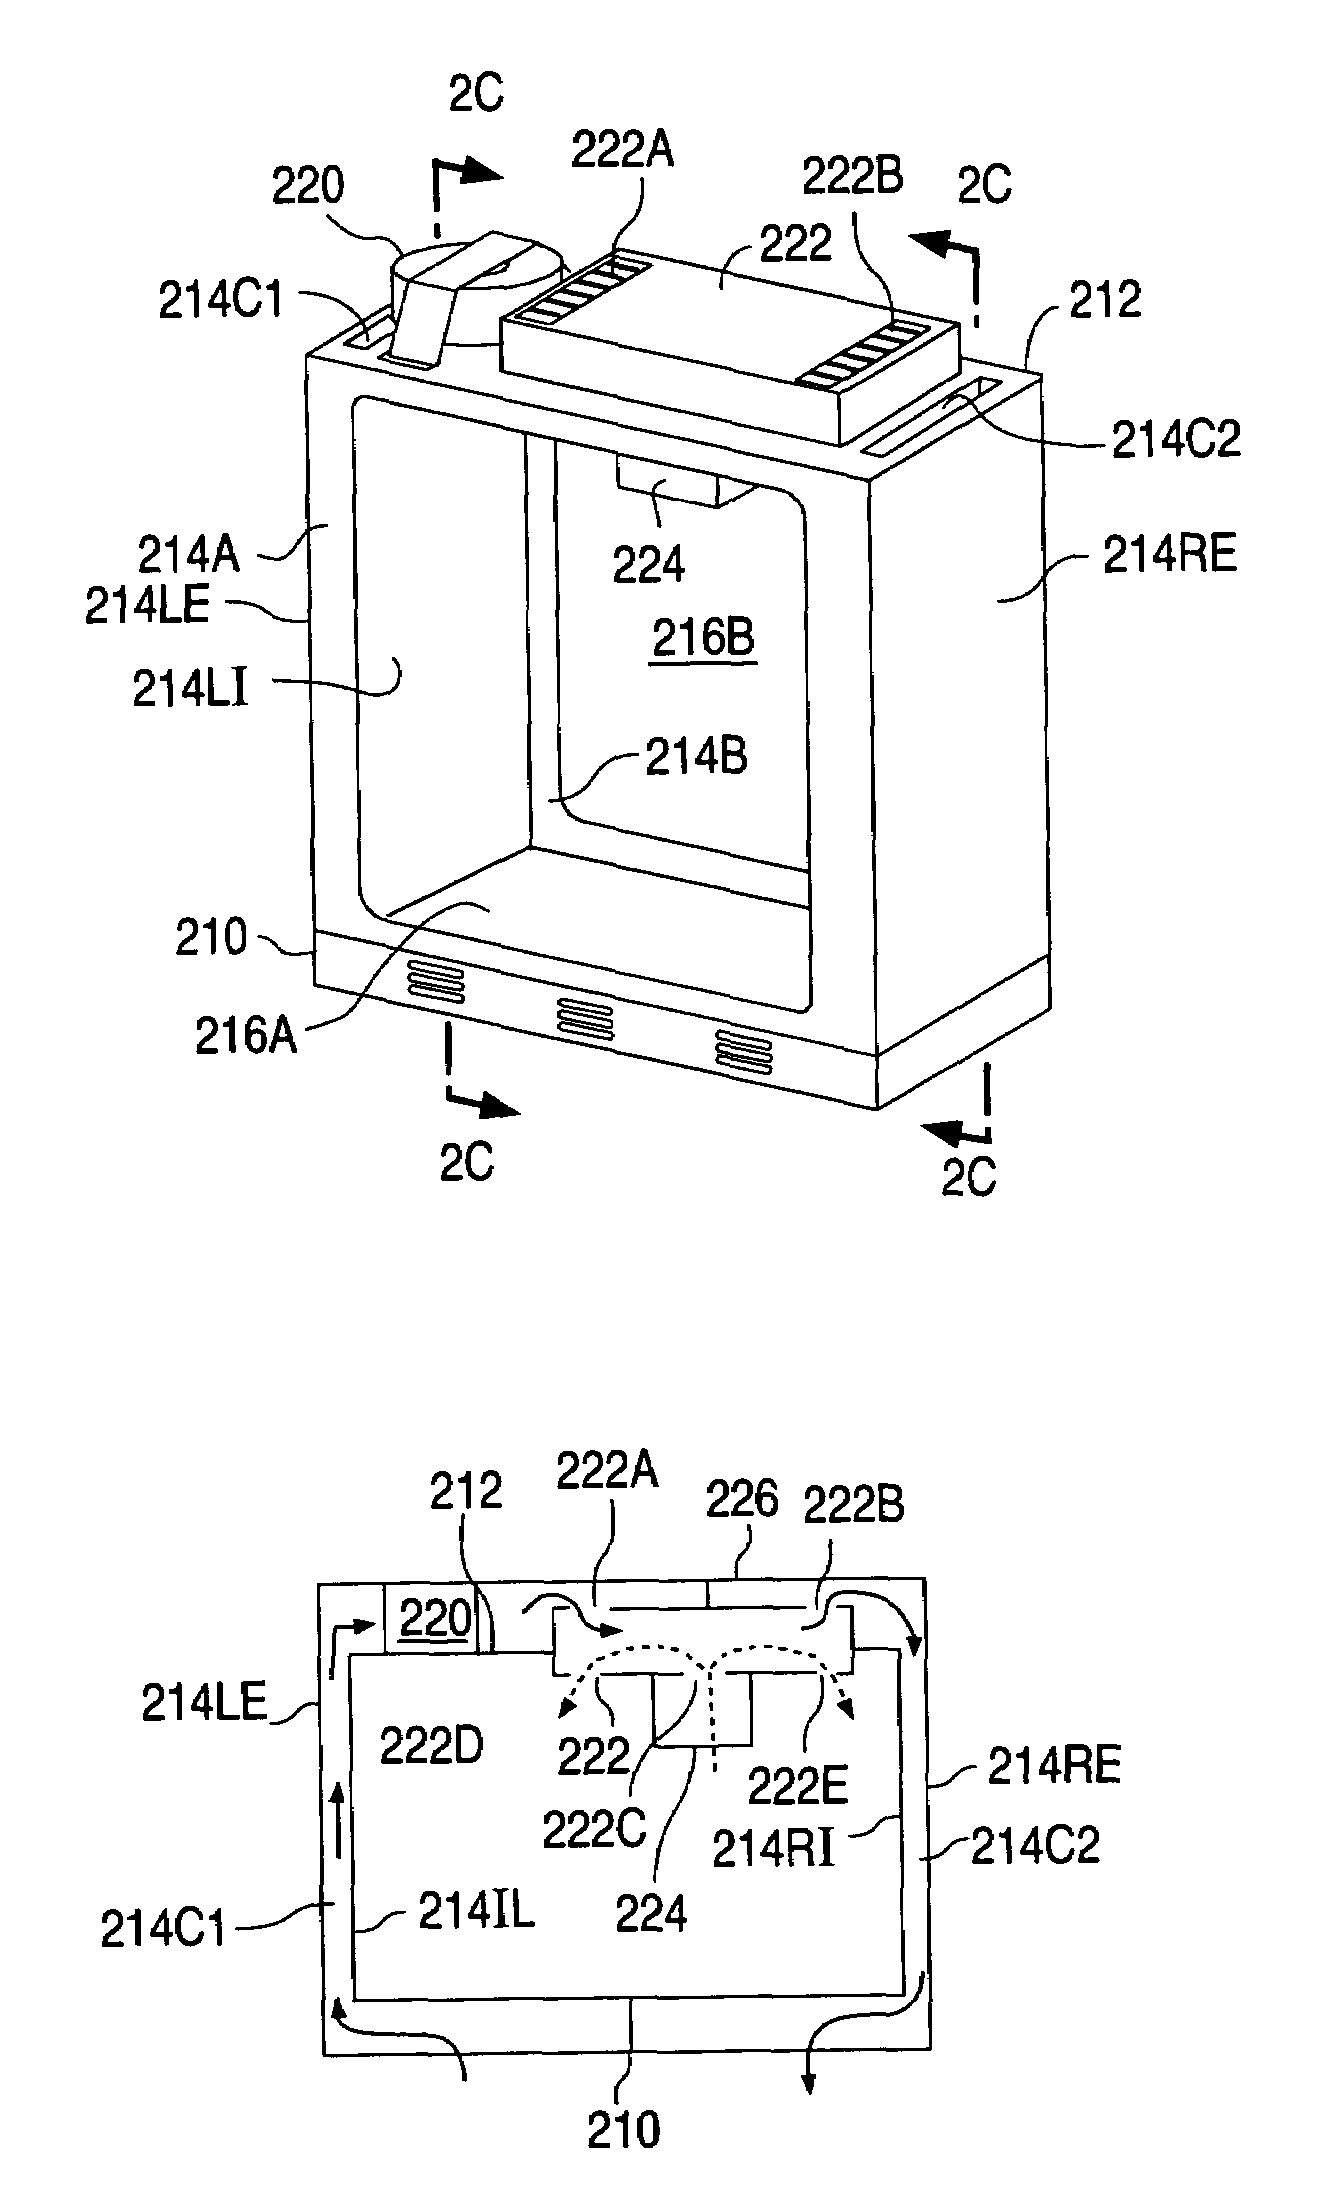 Cabinet with an environmentally-sealed air-to-air heat exchanger